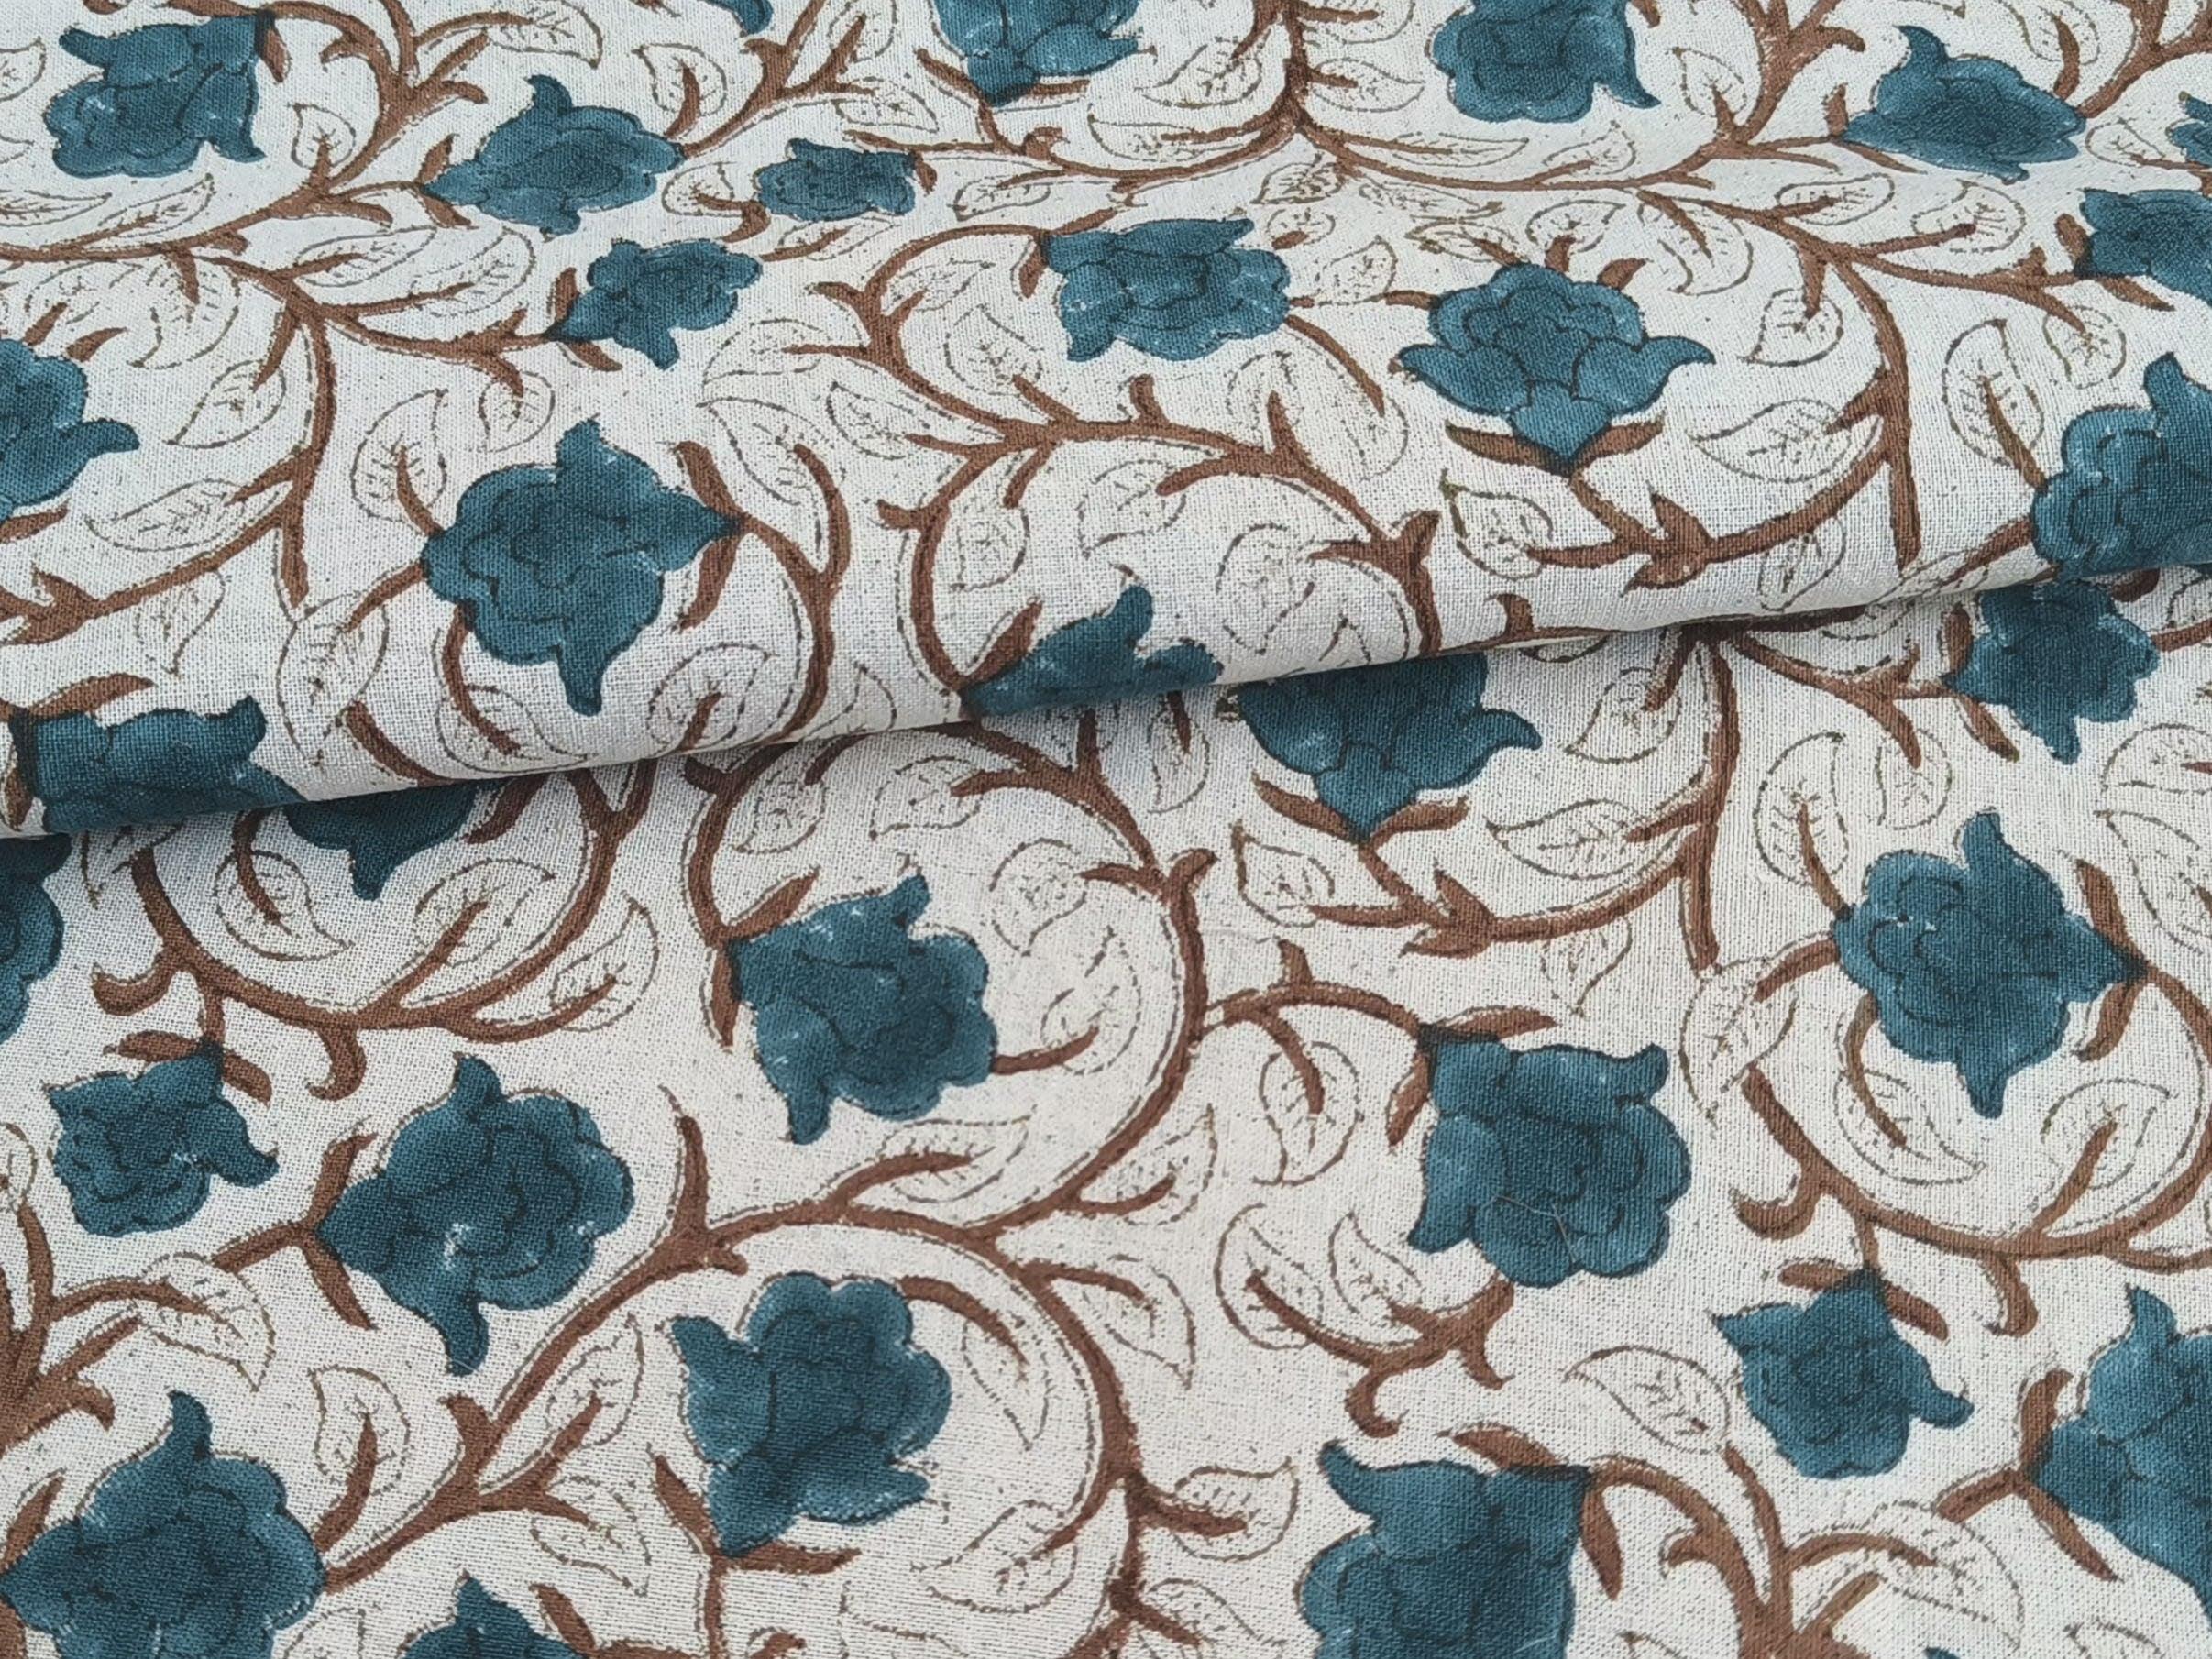 Amritvela  Block Print Linen Fabric  Printed Linen Fabric By The Yard  Best For Upholstery, Cushion Cover, Sofa/Chair Cover